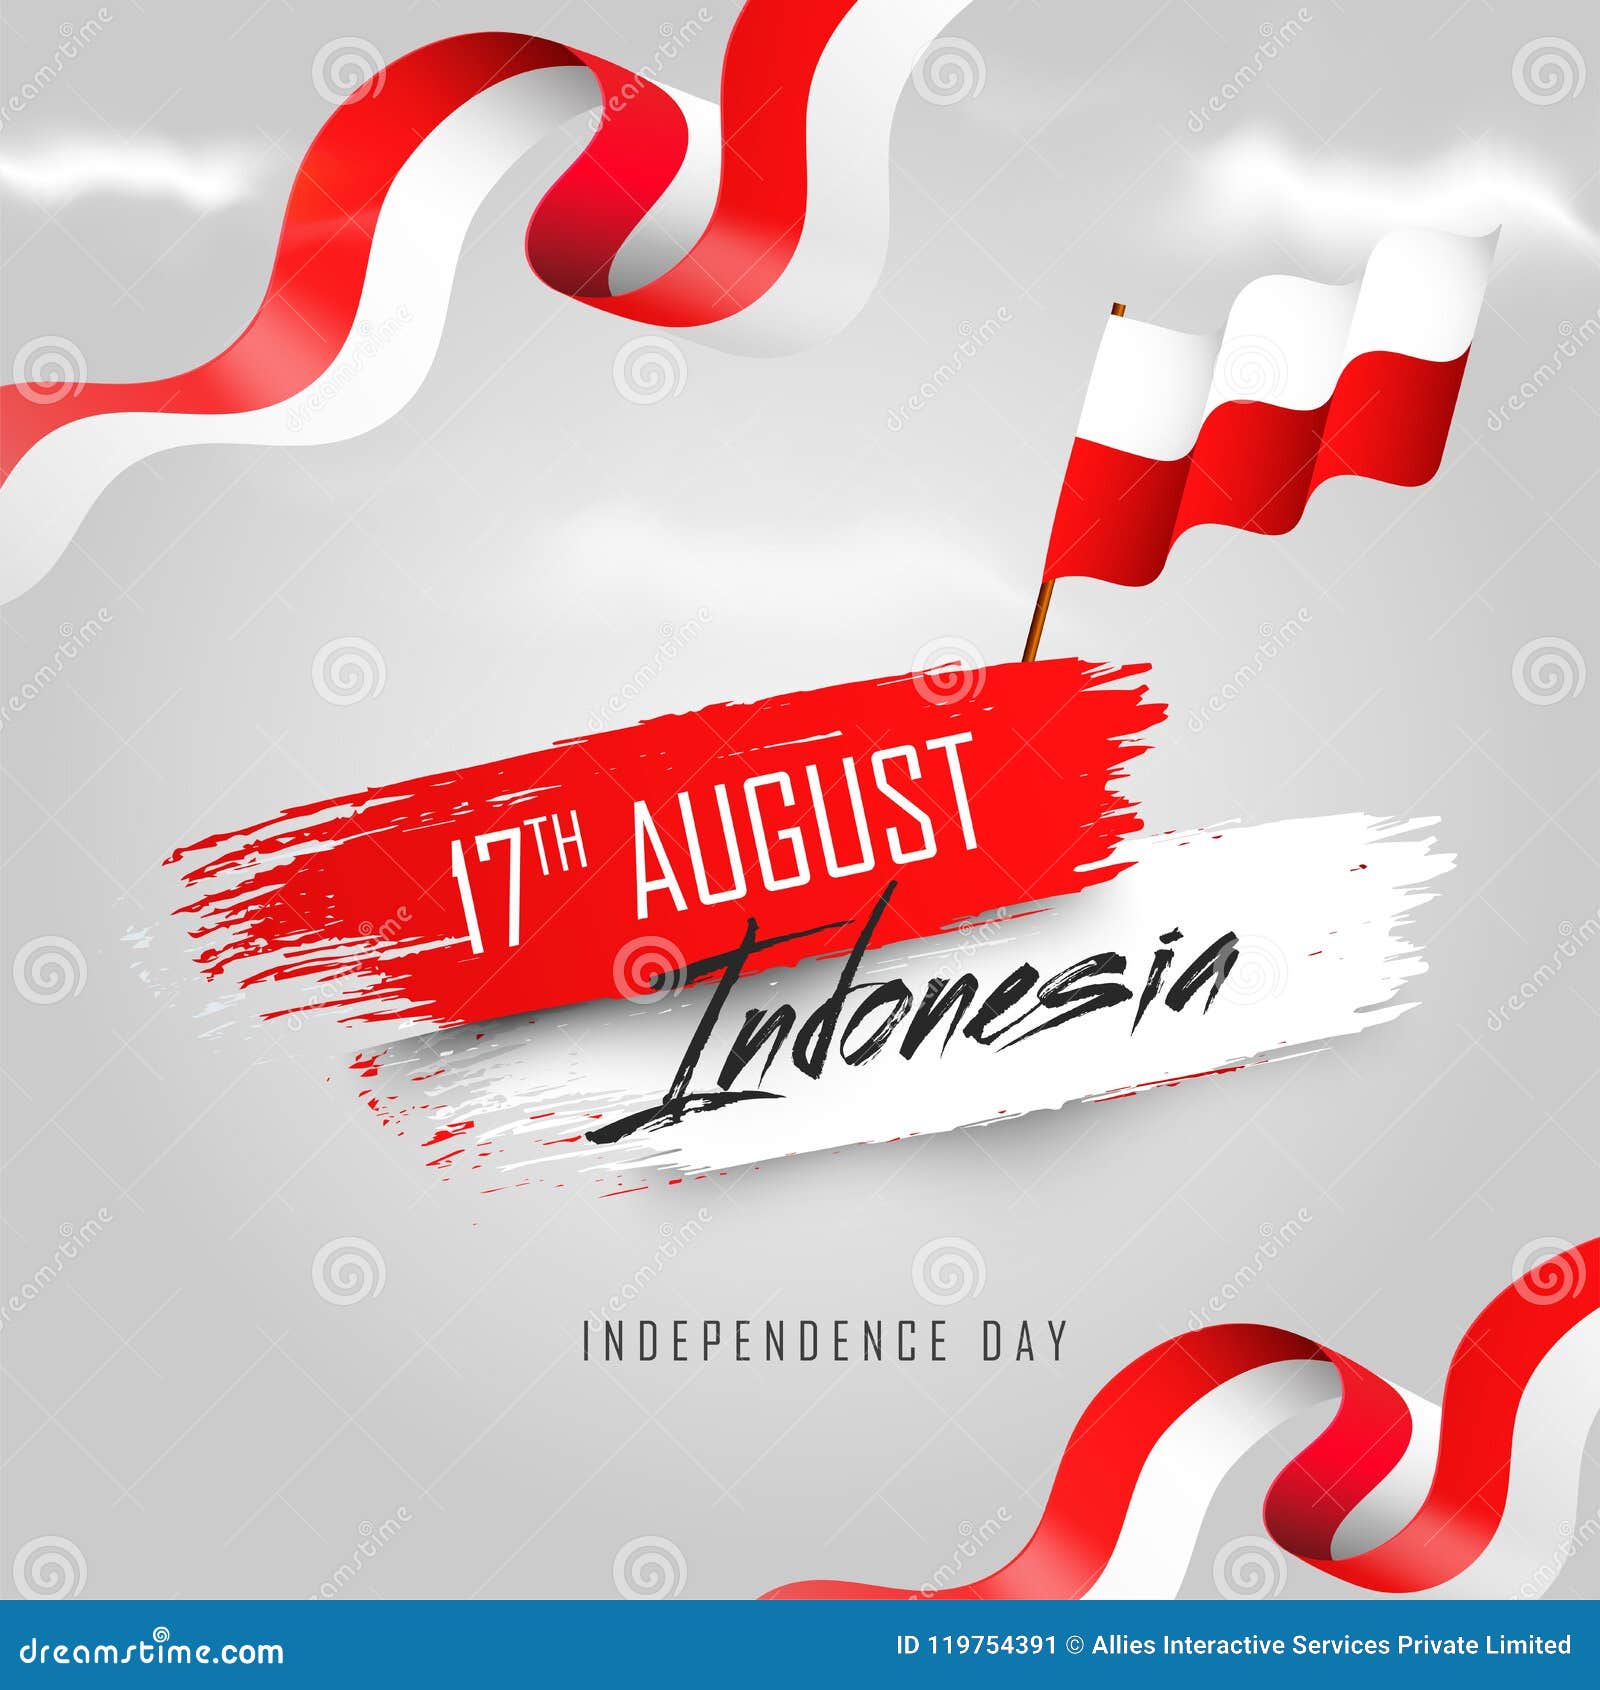 17th August Happy Independence Day Of Indonesia Design With A Flag ...